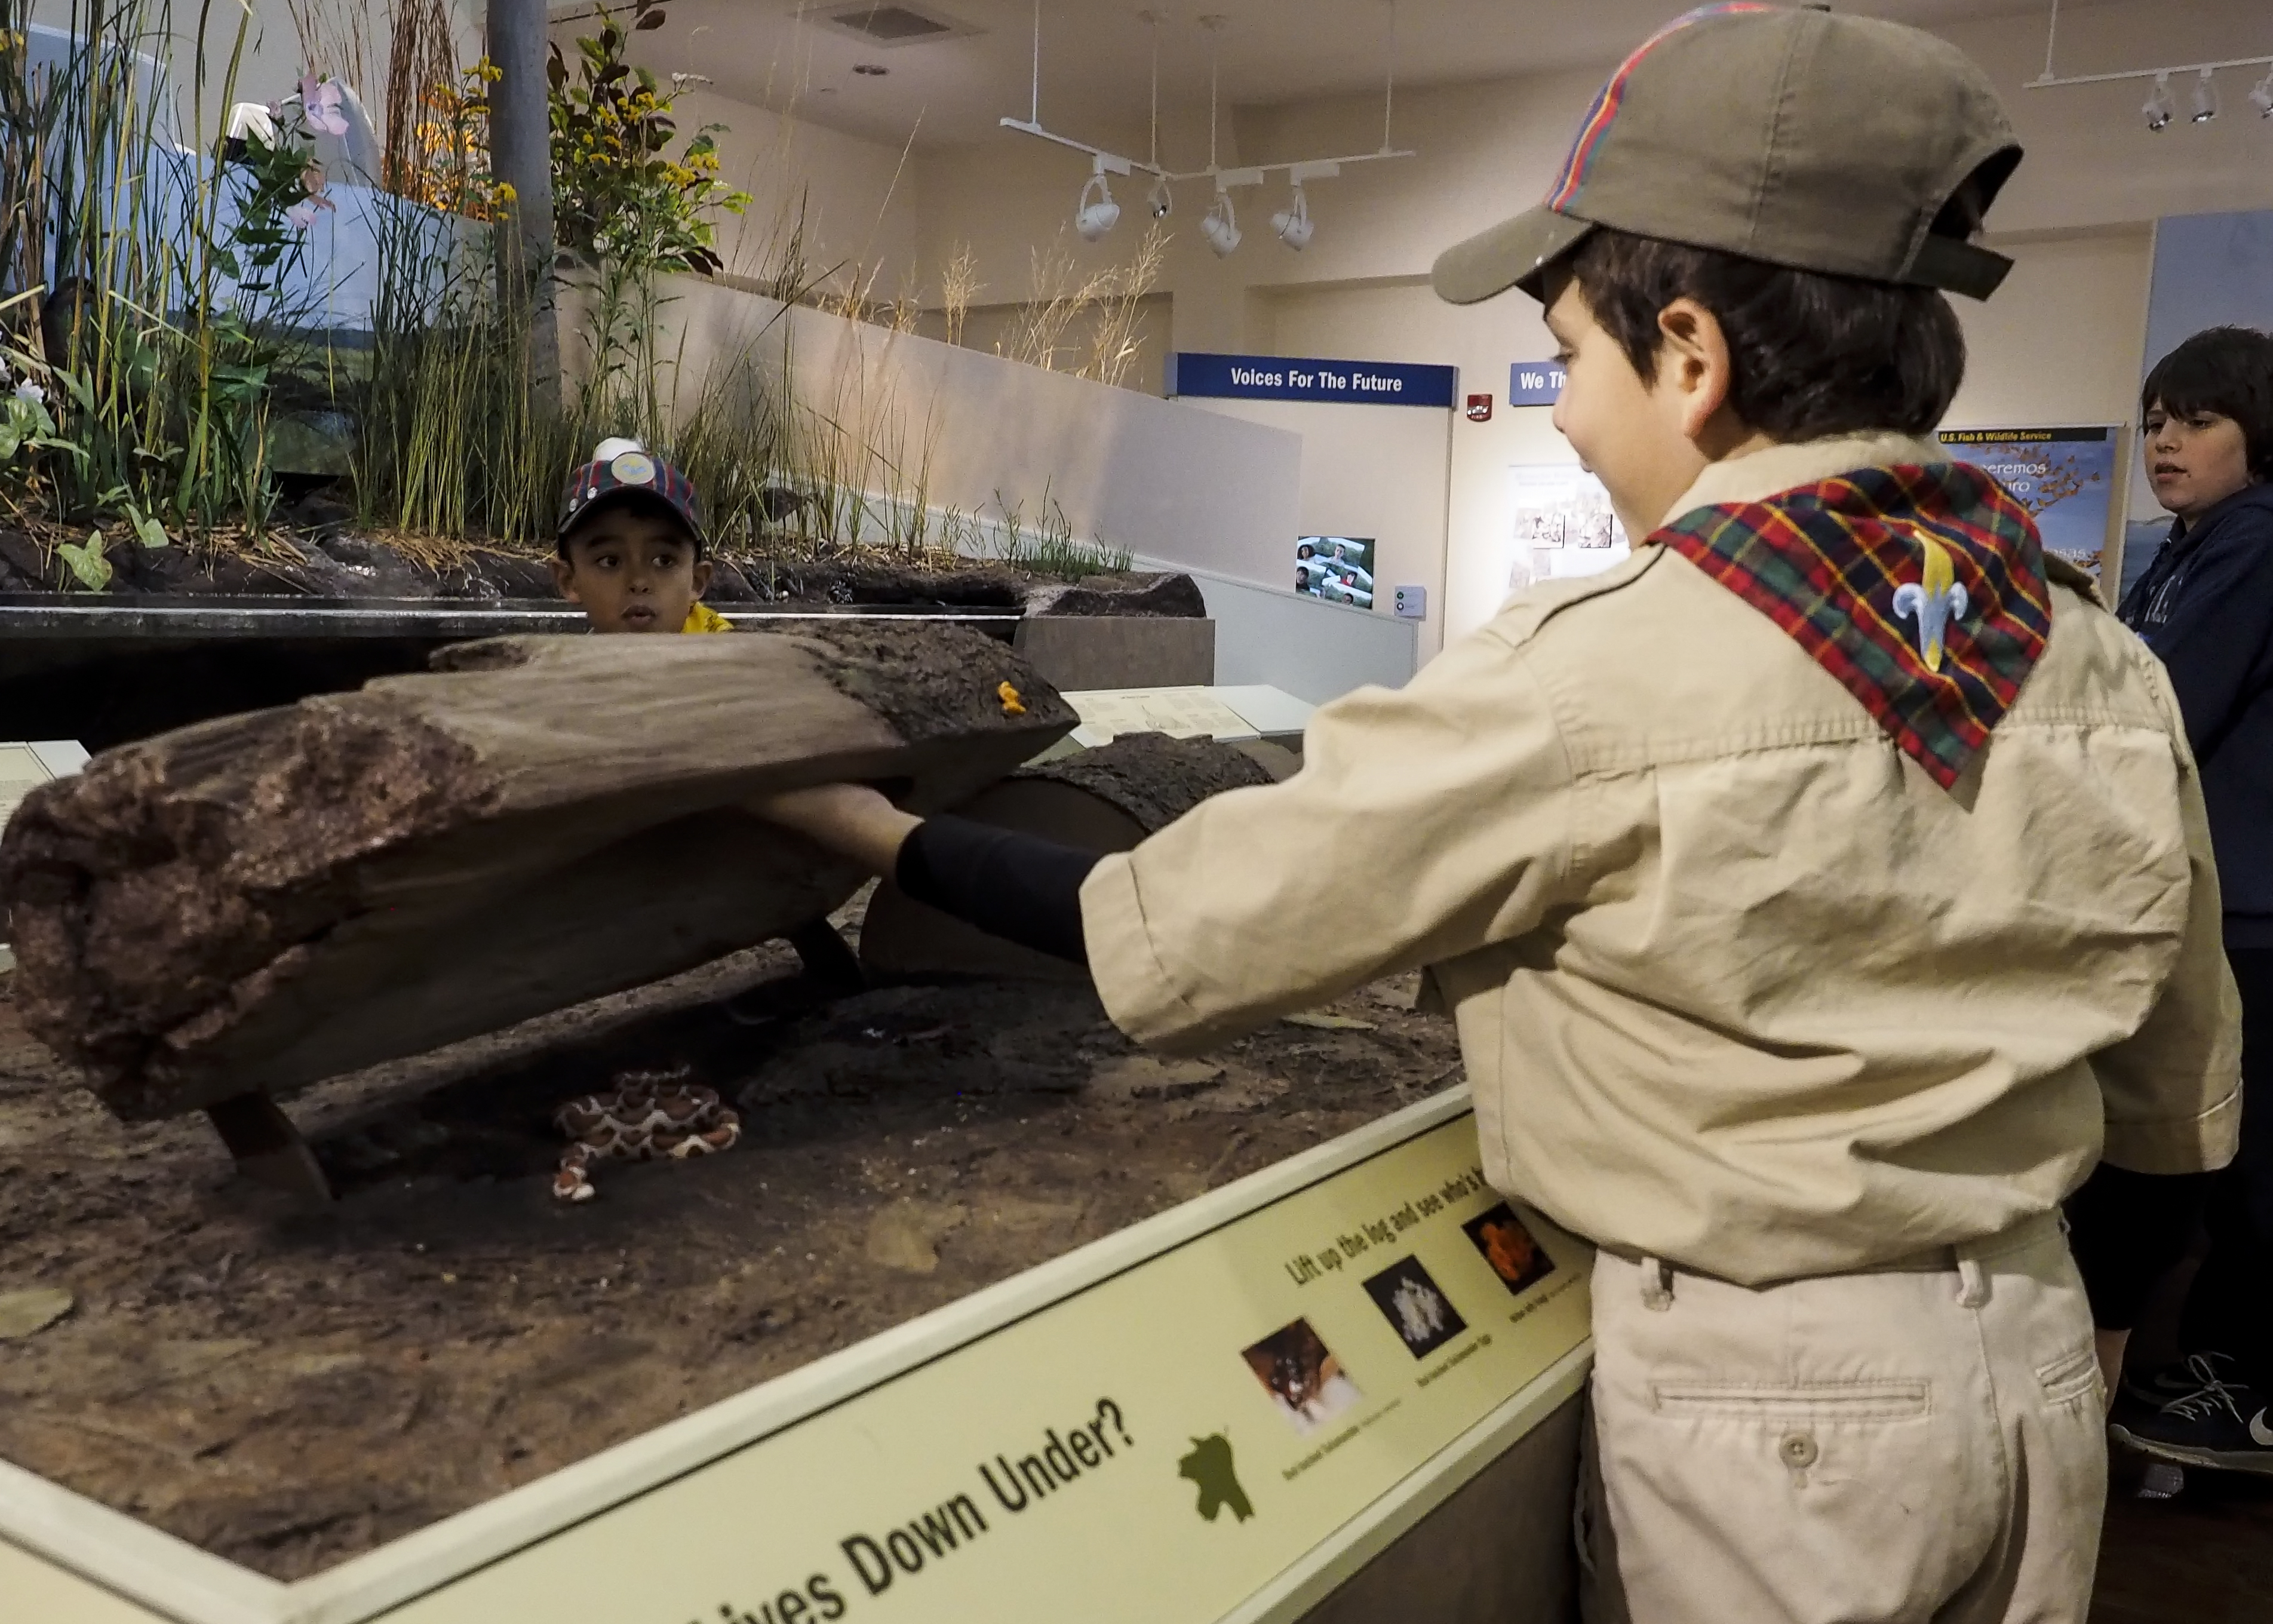 Boy scout explores exhibits in the visitor center